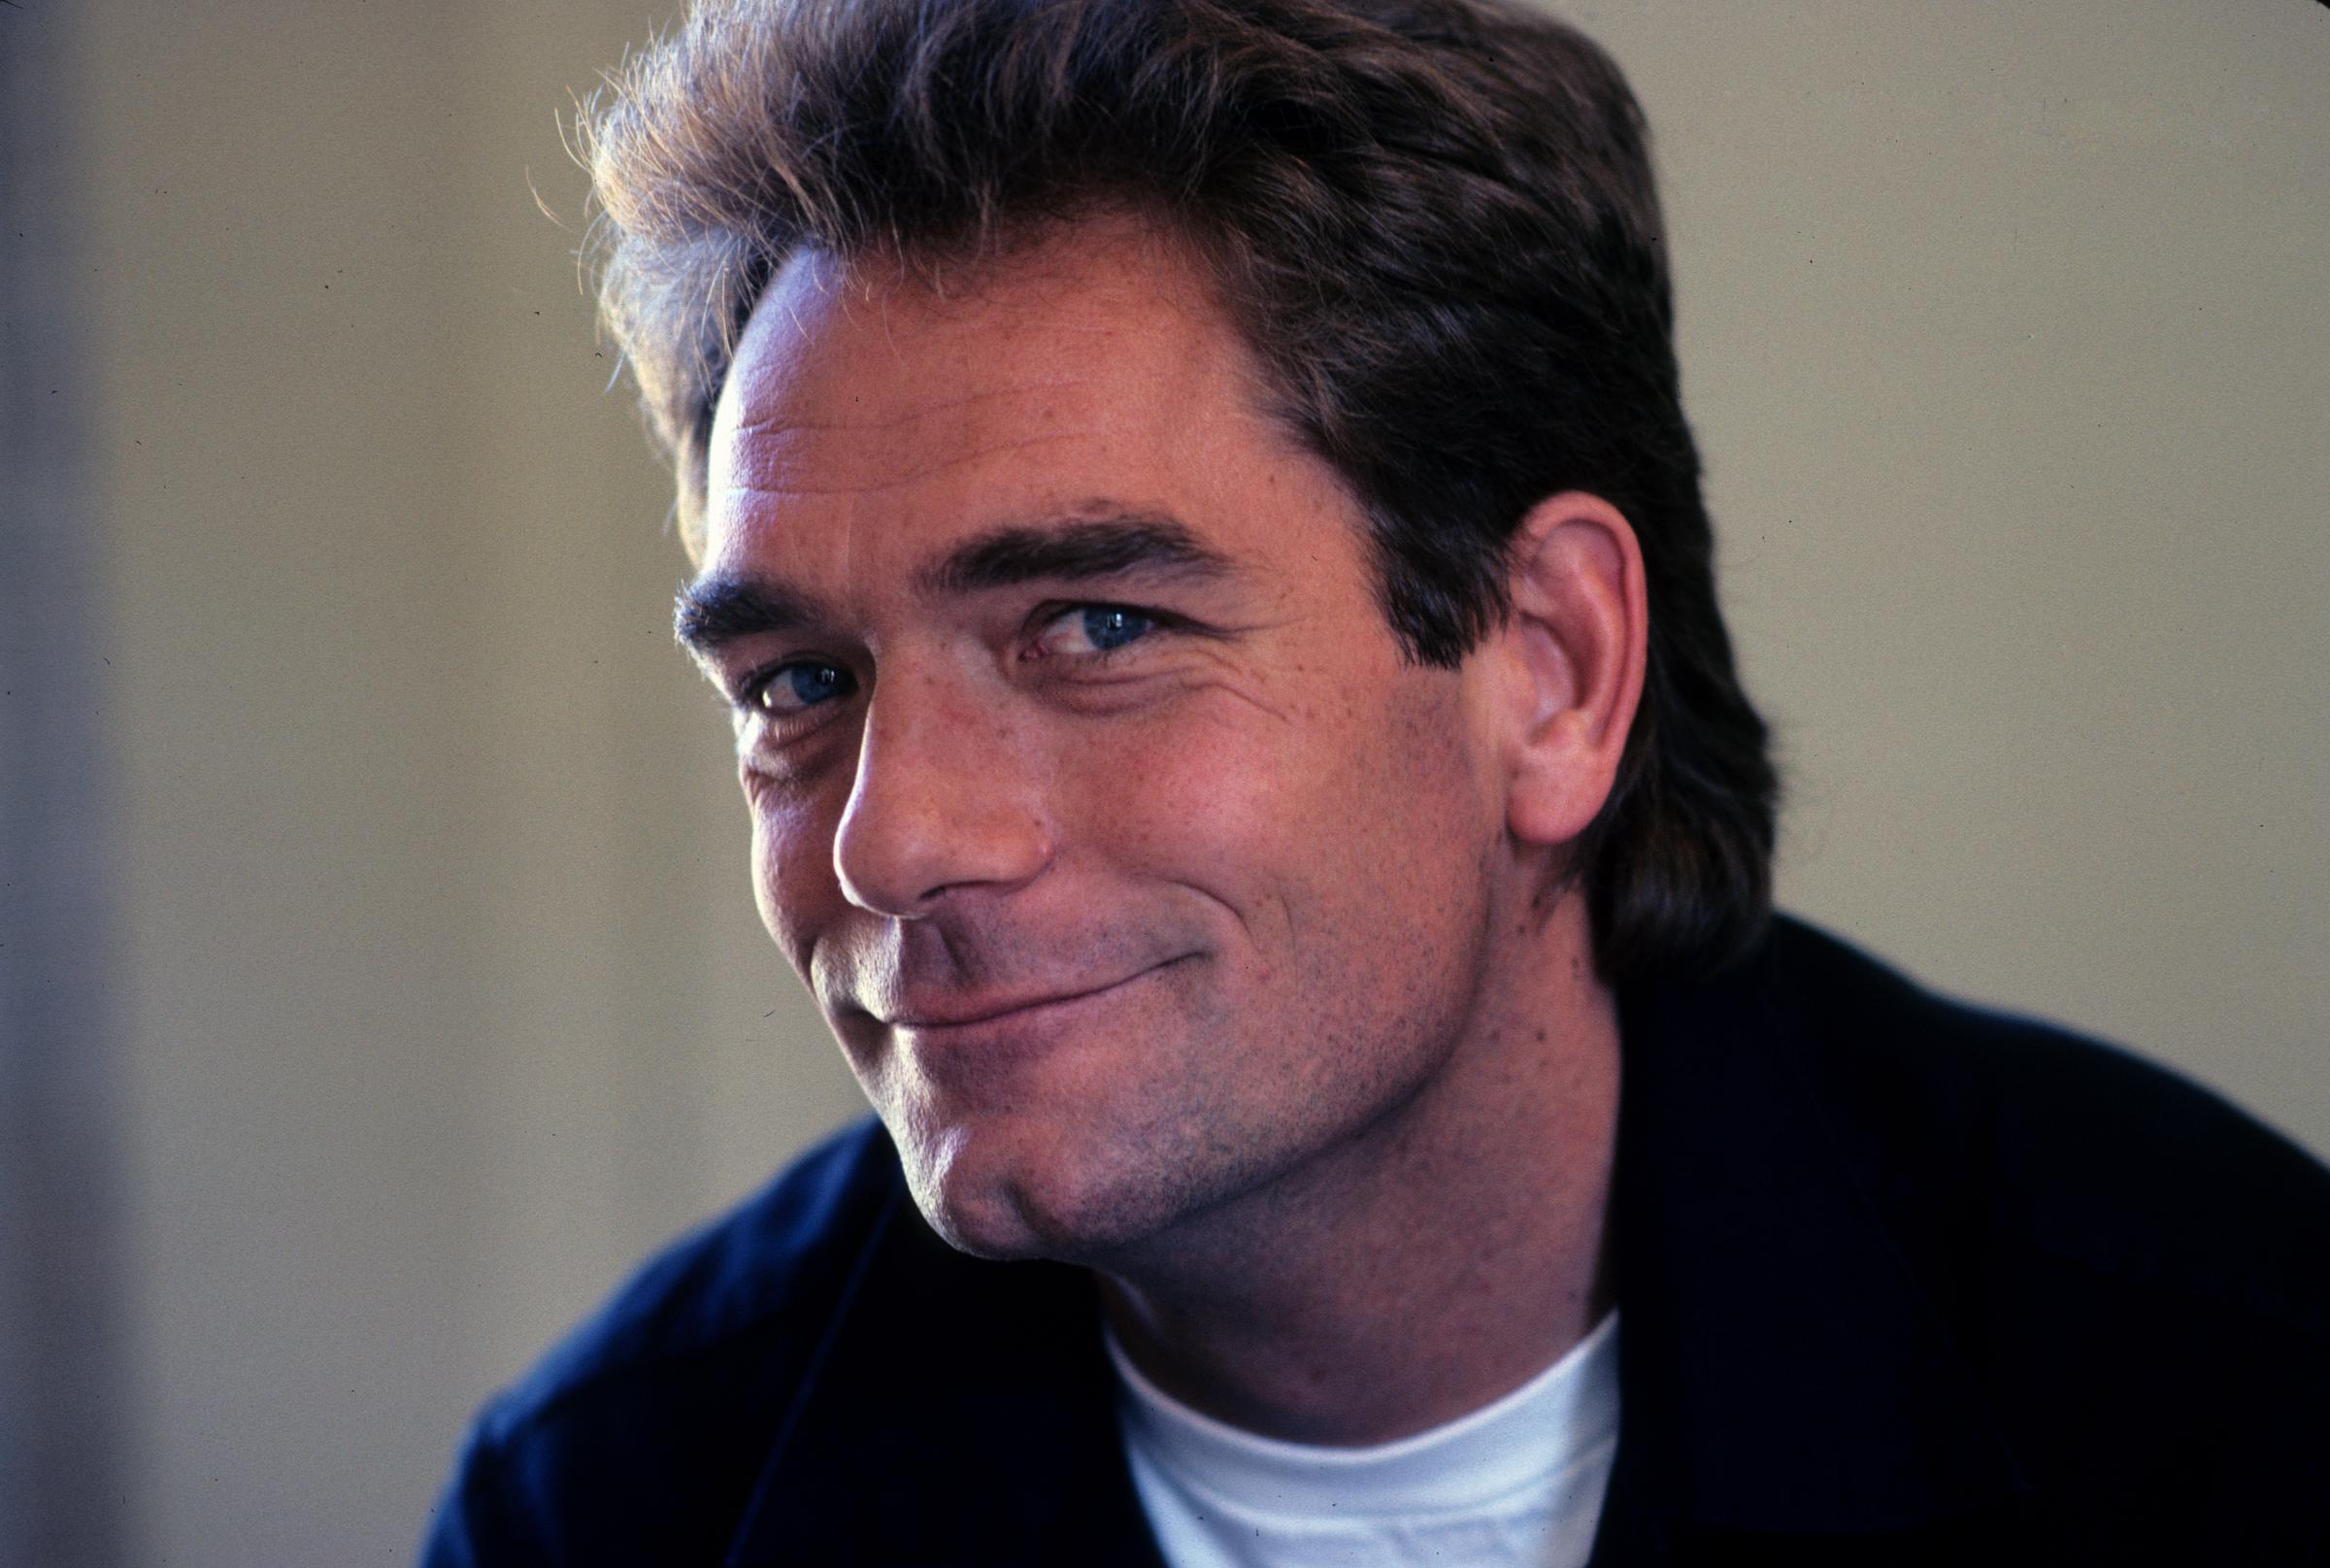 Huey Lewis circa 1980. | Source: Getty Images